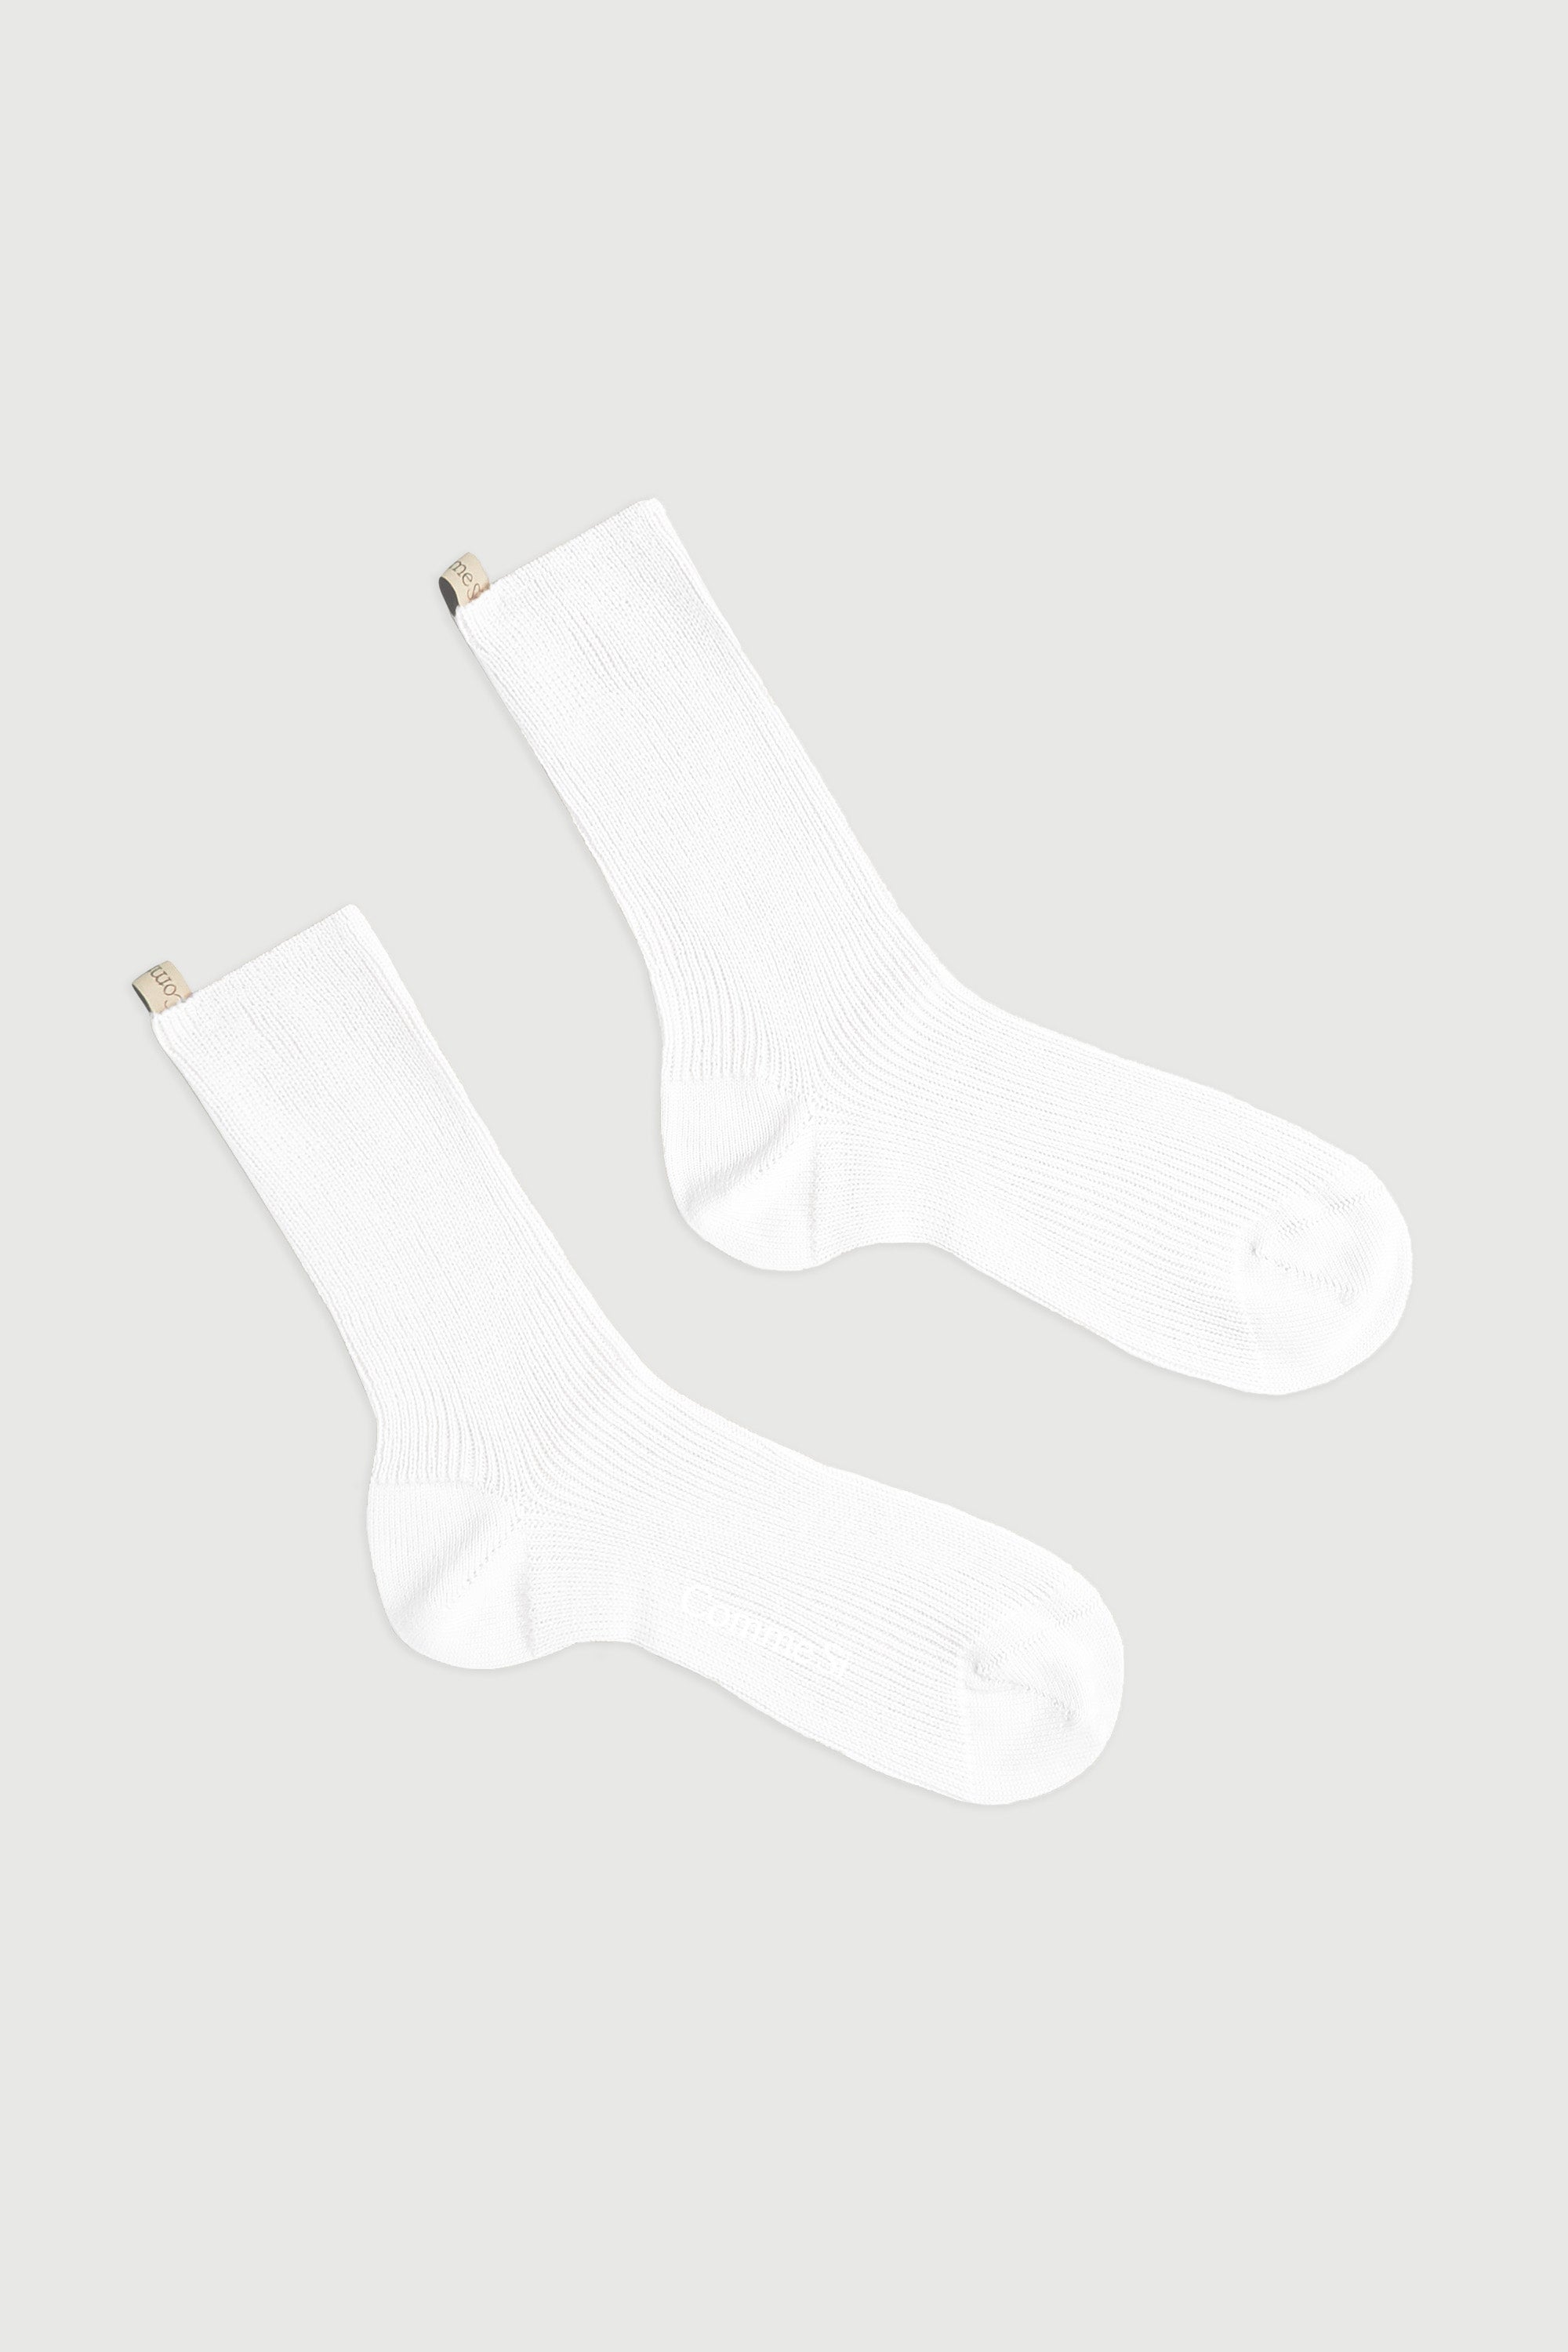 The Merino Sock in white, merino wool, by Comme Si